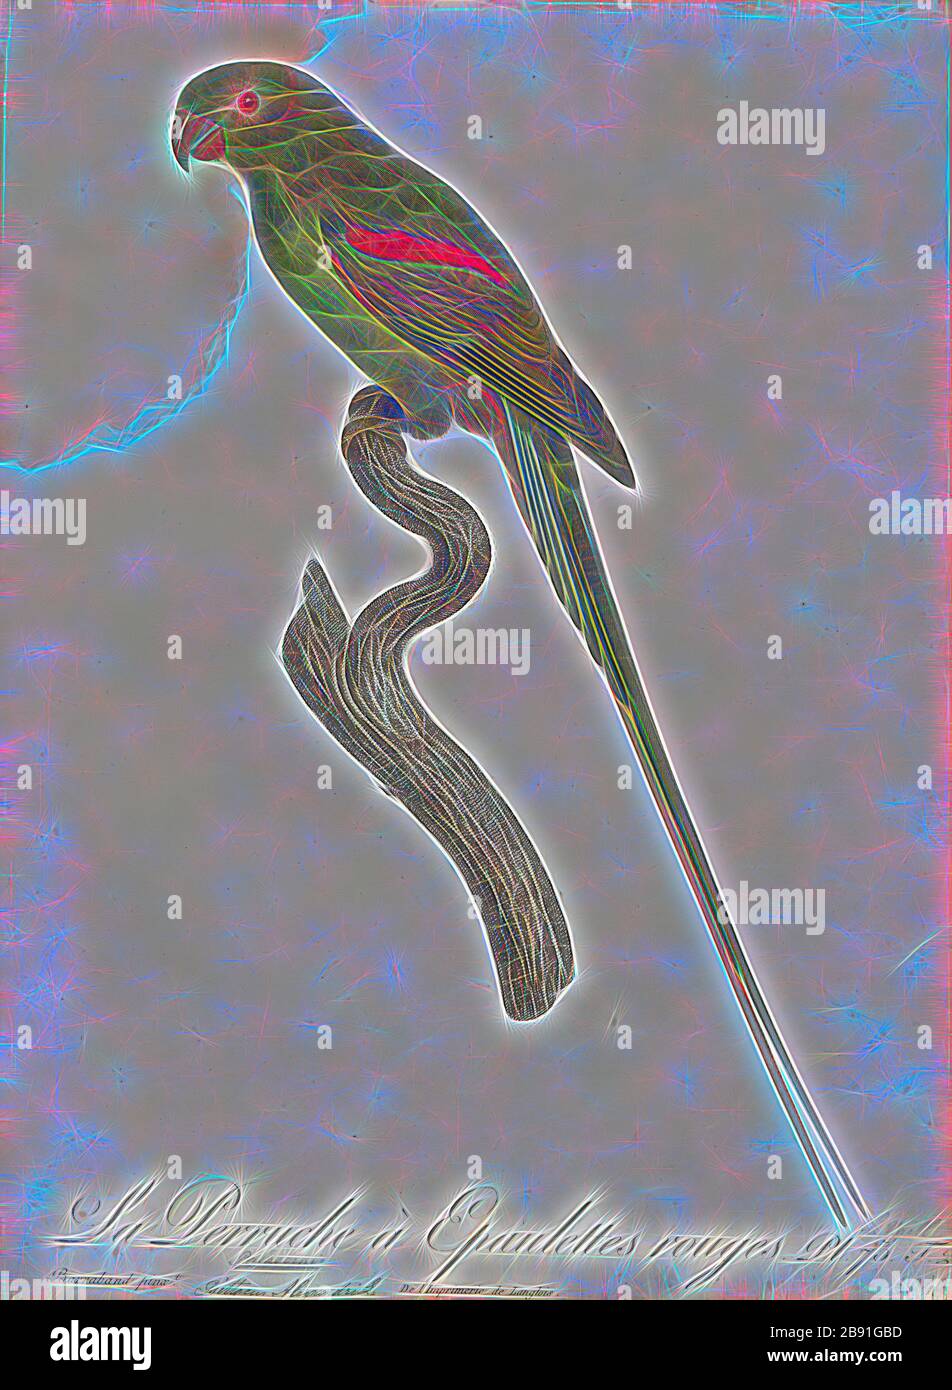 Palaeornis eupatria, Print, Psittacula, Members of the parrot genus Psittacula or Afro-Asian ring-necked parakeets as they are commonly known in aviculture originates found from Africa to South-East Asia. It is a widespread group, with a clear concentration of species in south Asia, but also with representatives in Africa and the islands of the Indian Ocean. This is the only genus of Parrot which has the majority of its species in continental Asia. Of all the extant species only Psittacula calthropae, Psittacula caniceps and Psittacula echo do not have a representative subspecies in any part o Stock Photo